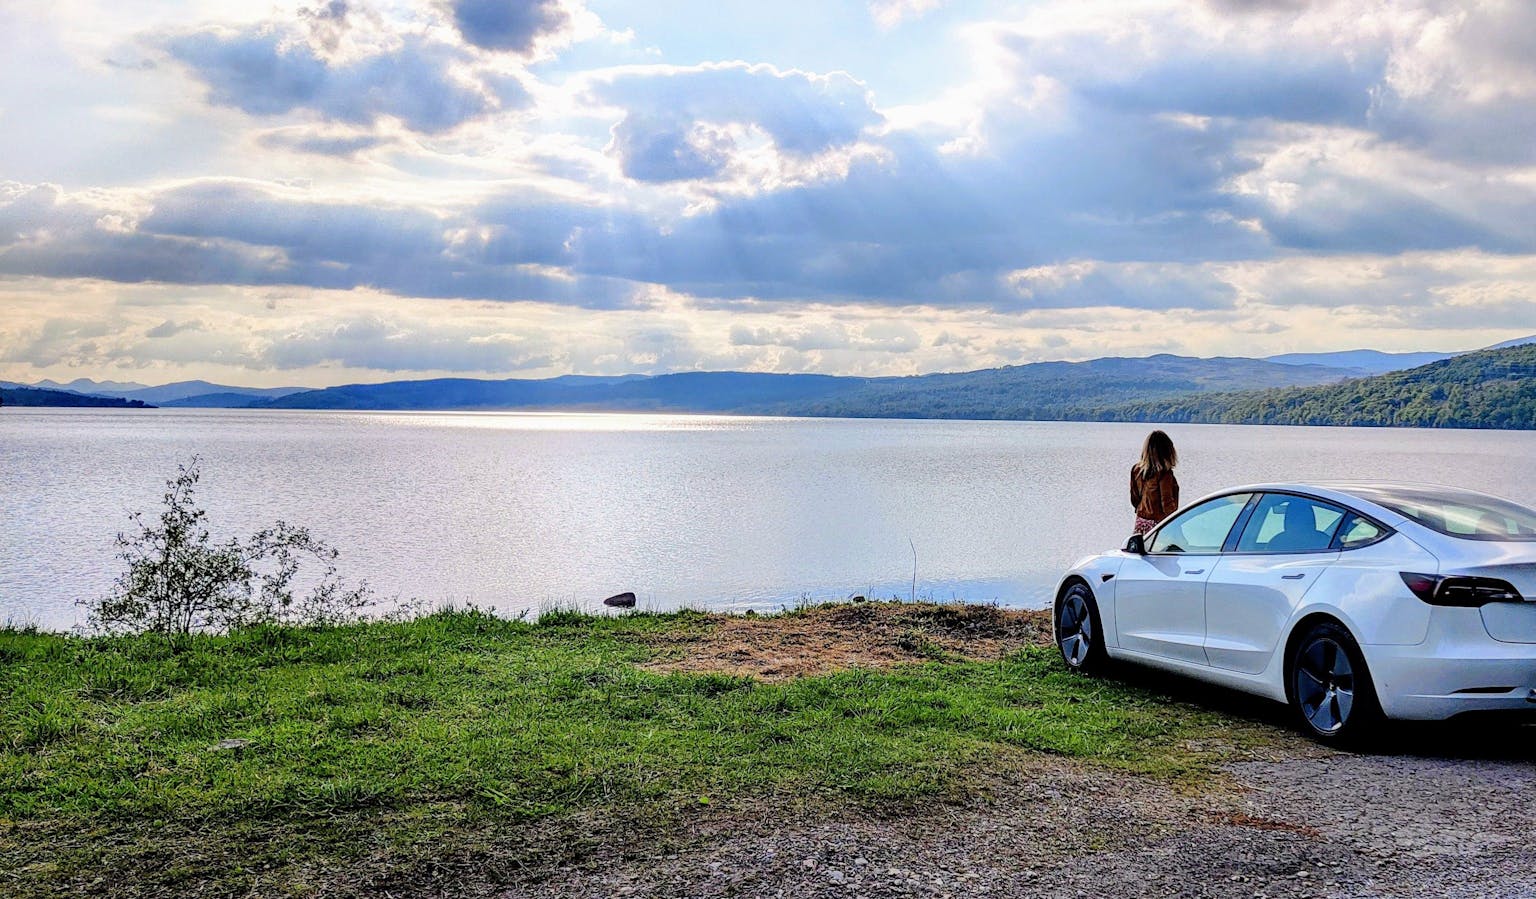 image shows woman standing next to electric car, next to lake with hills and clouds in the background